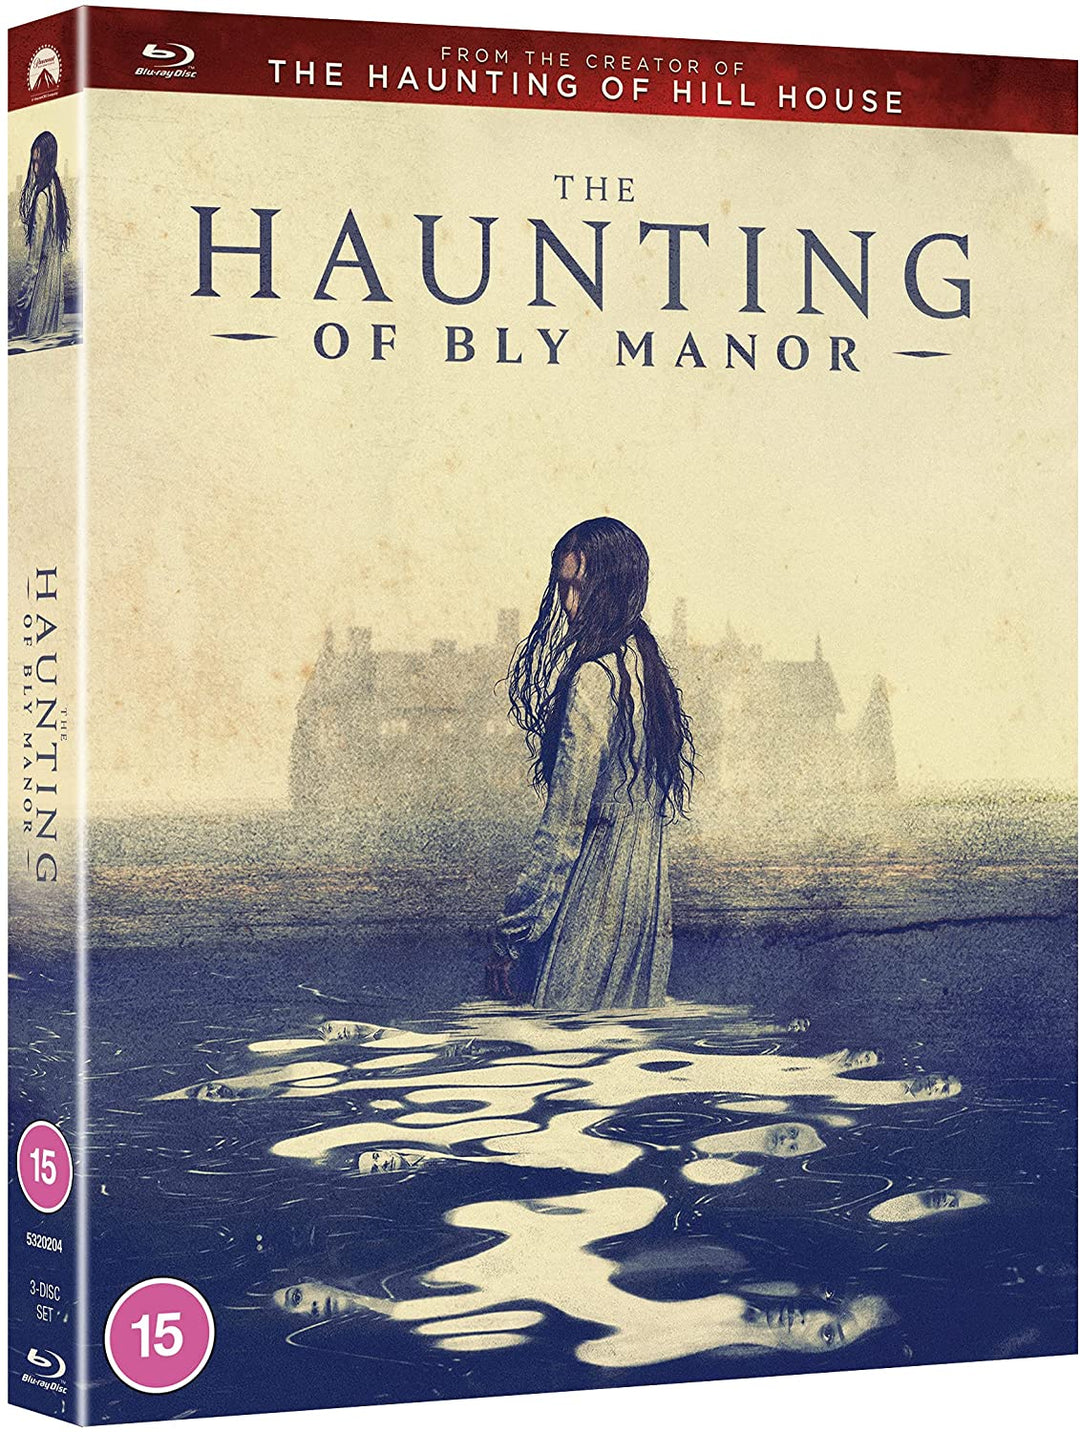 The Haunting of Bly Manor [Blu-ray]